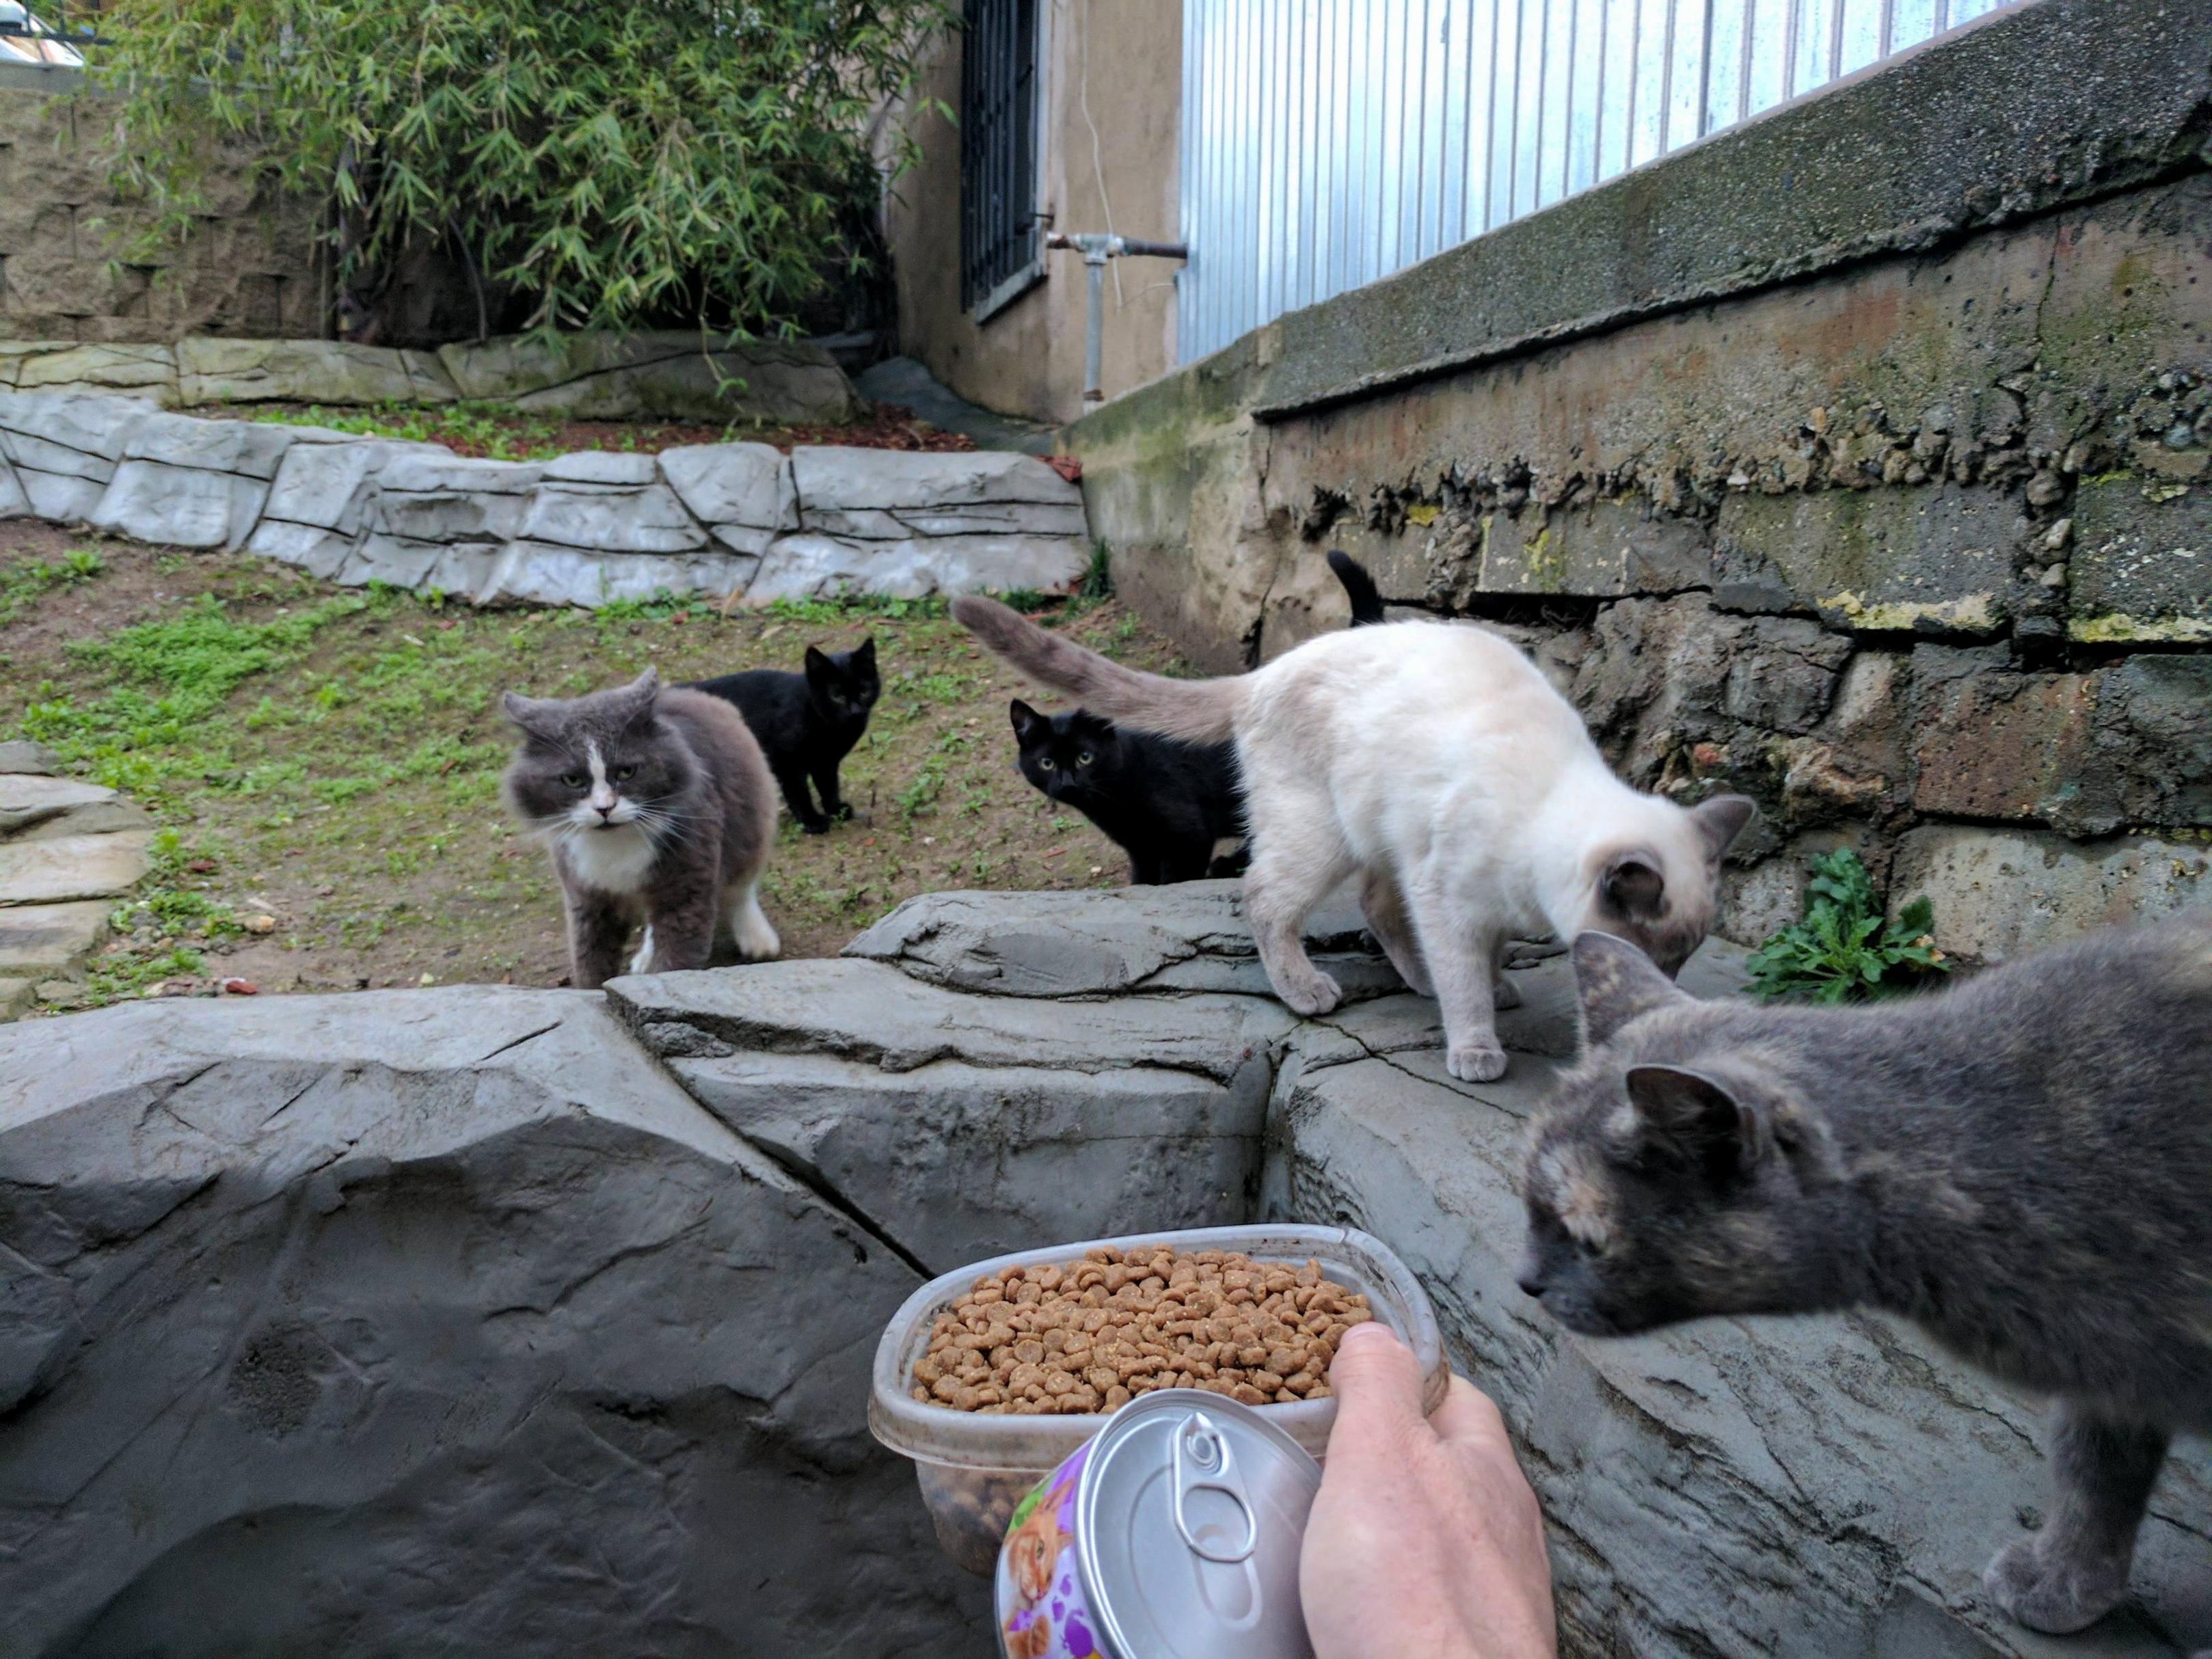 Alley cat dinner time